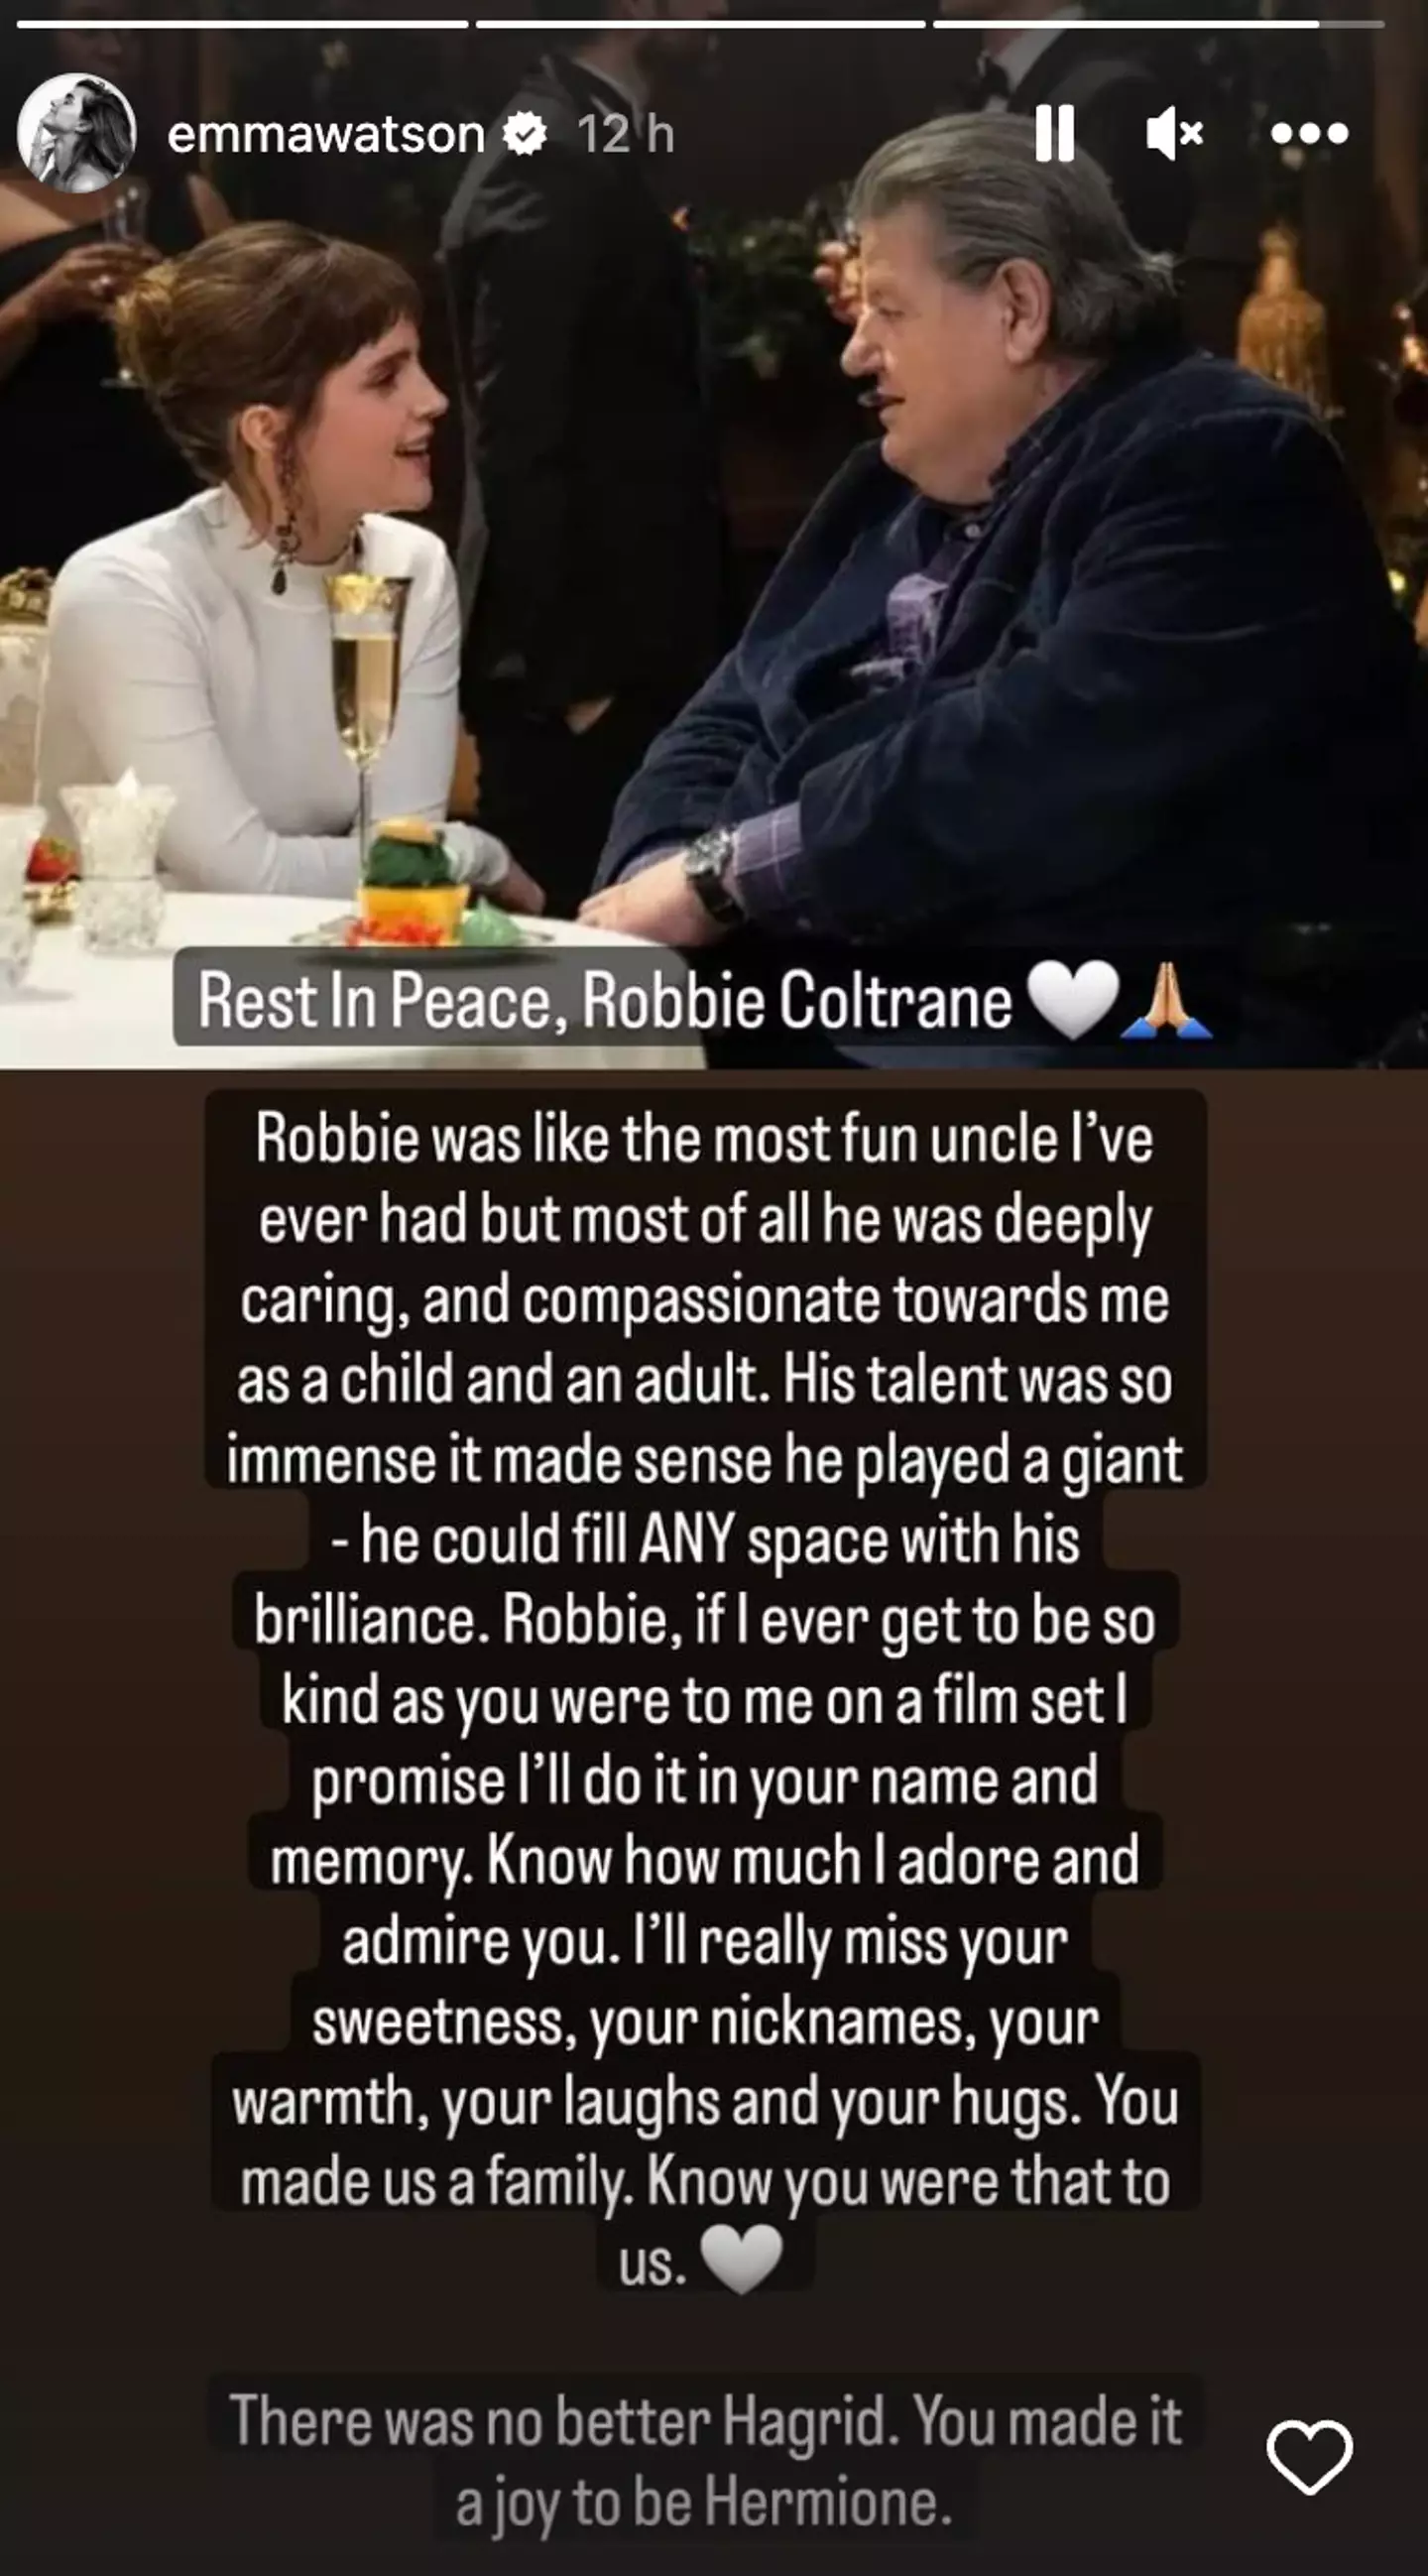 Emma Watson took to her Instagram Stories to share her memories of Coltrane.